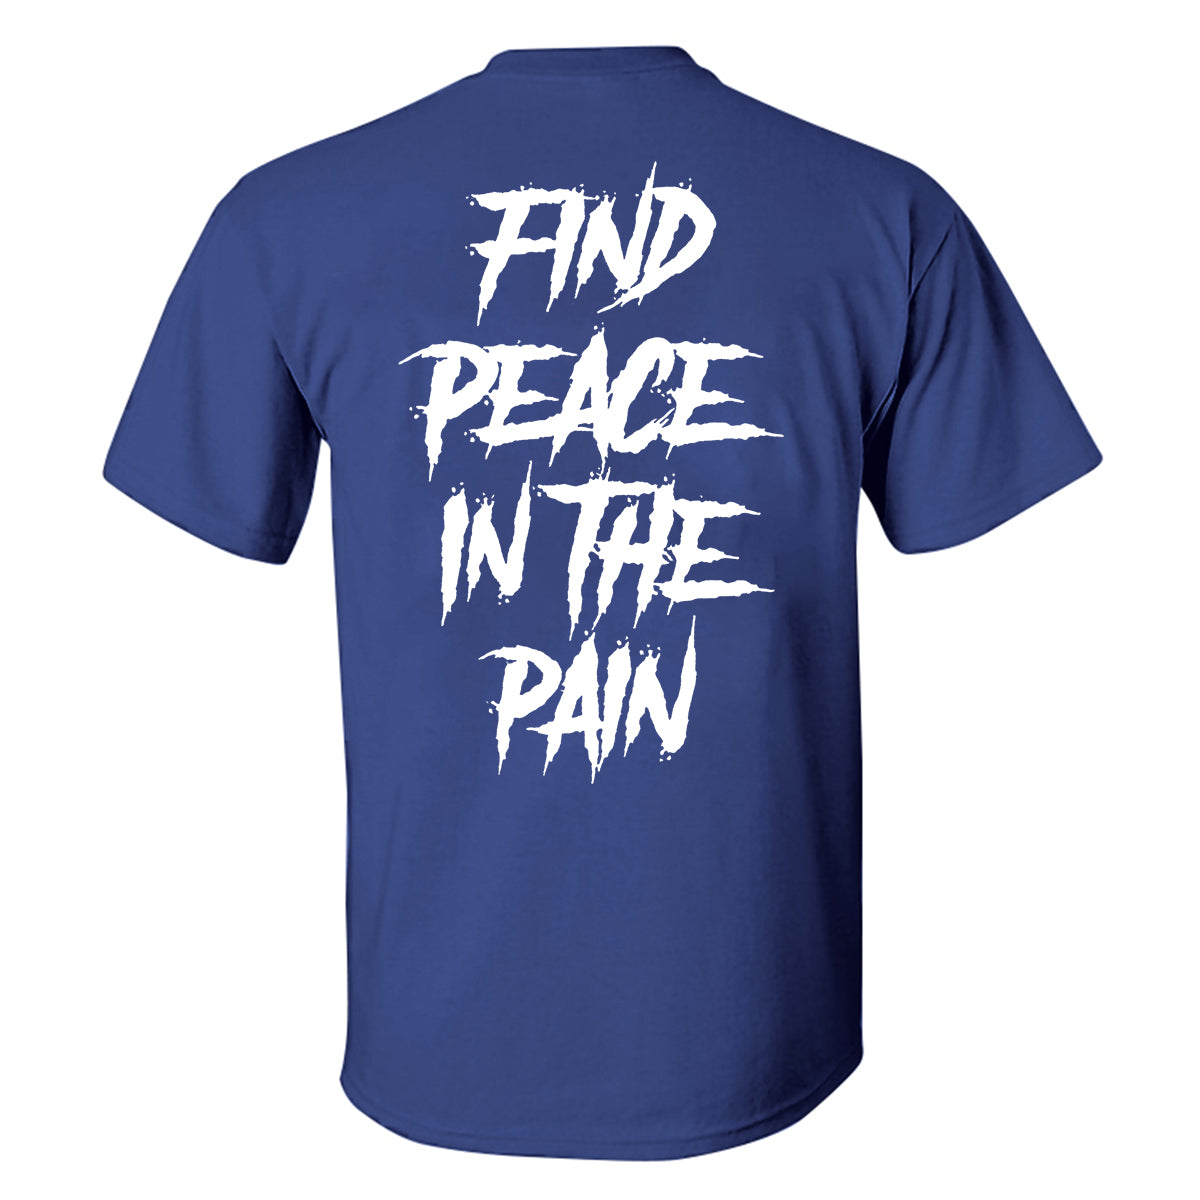 Find peace in the pain Printed T-shirt